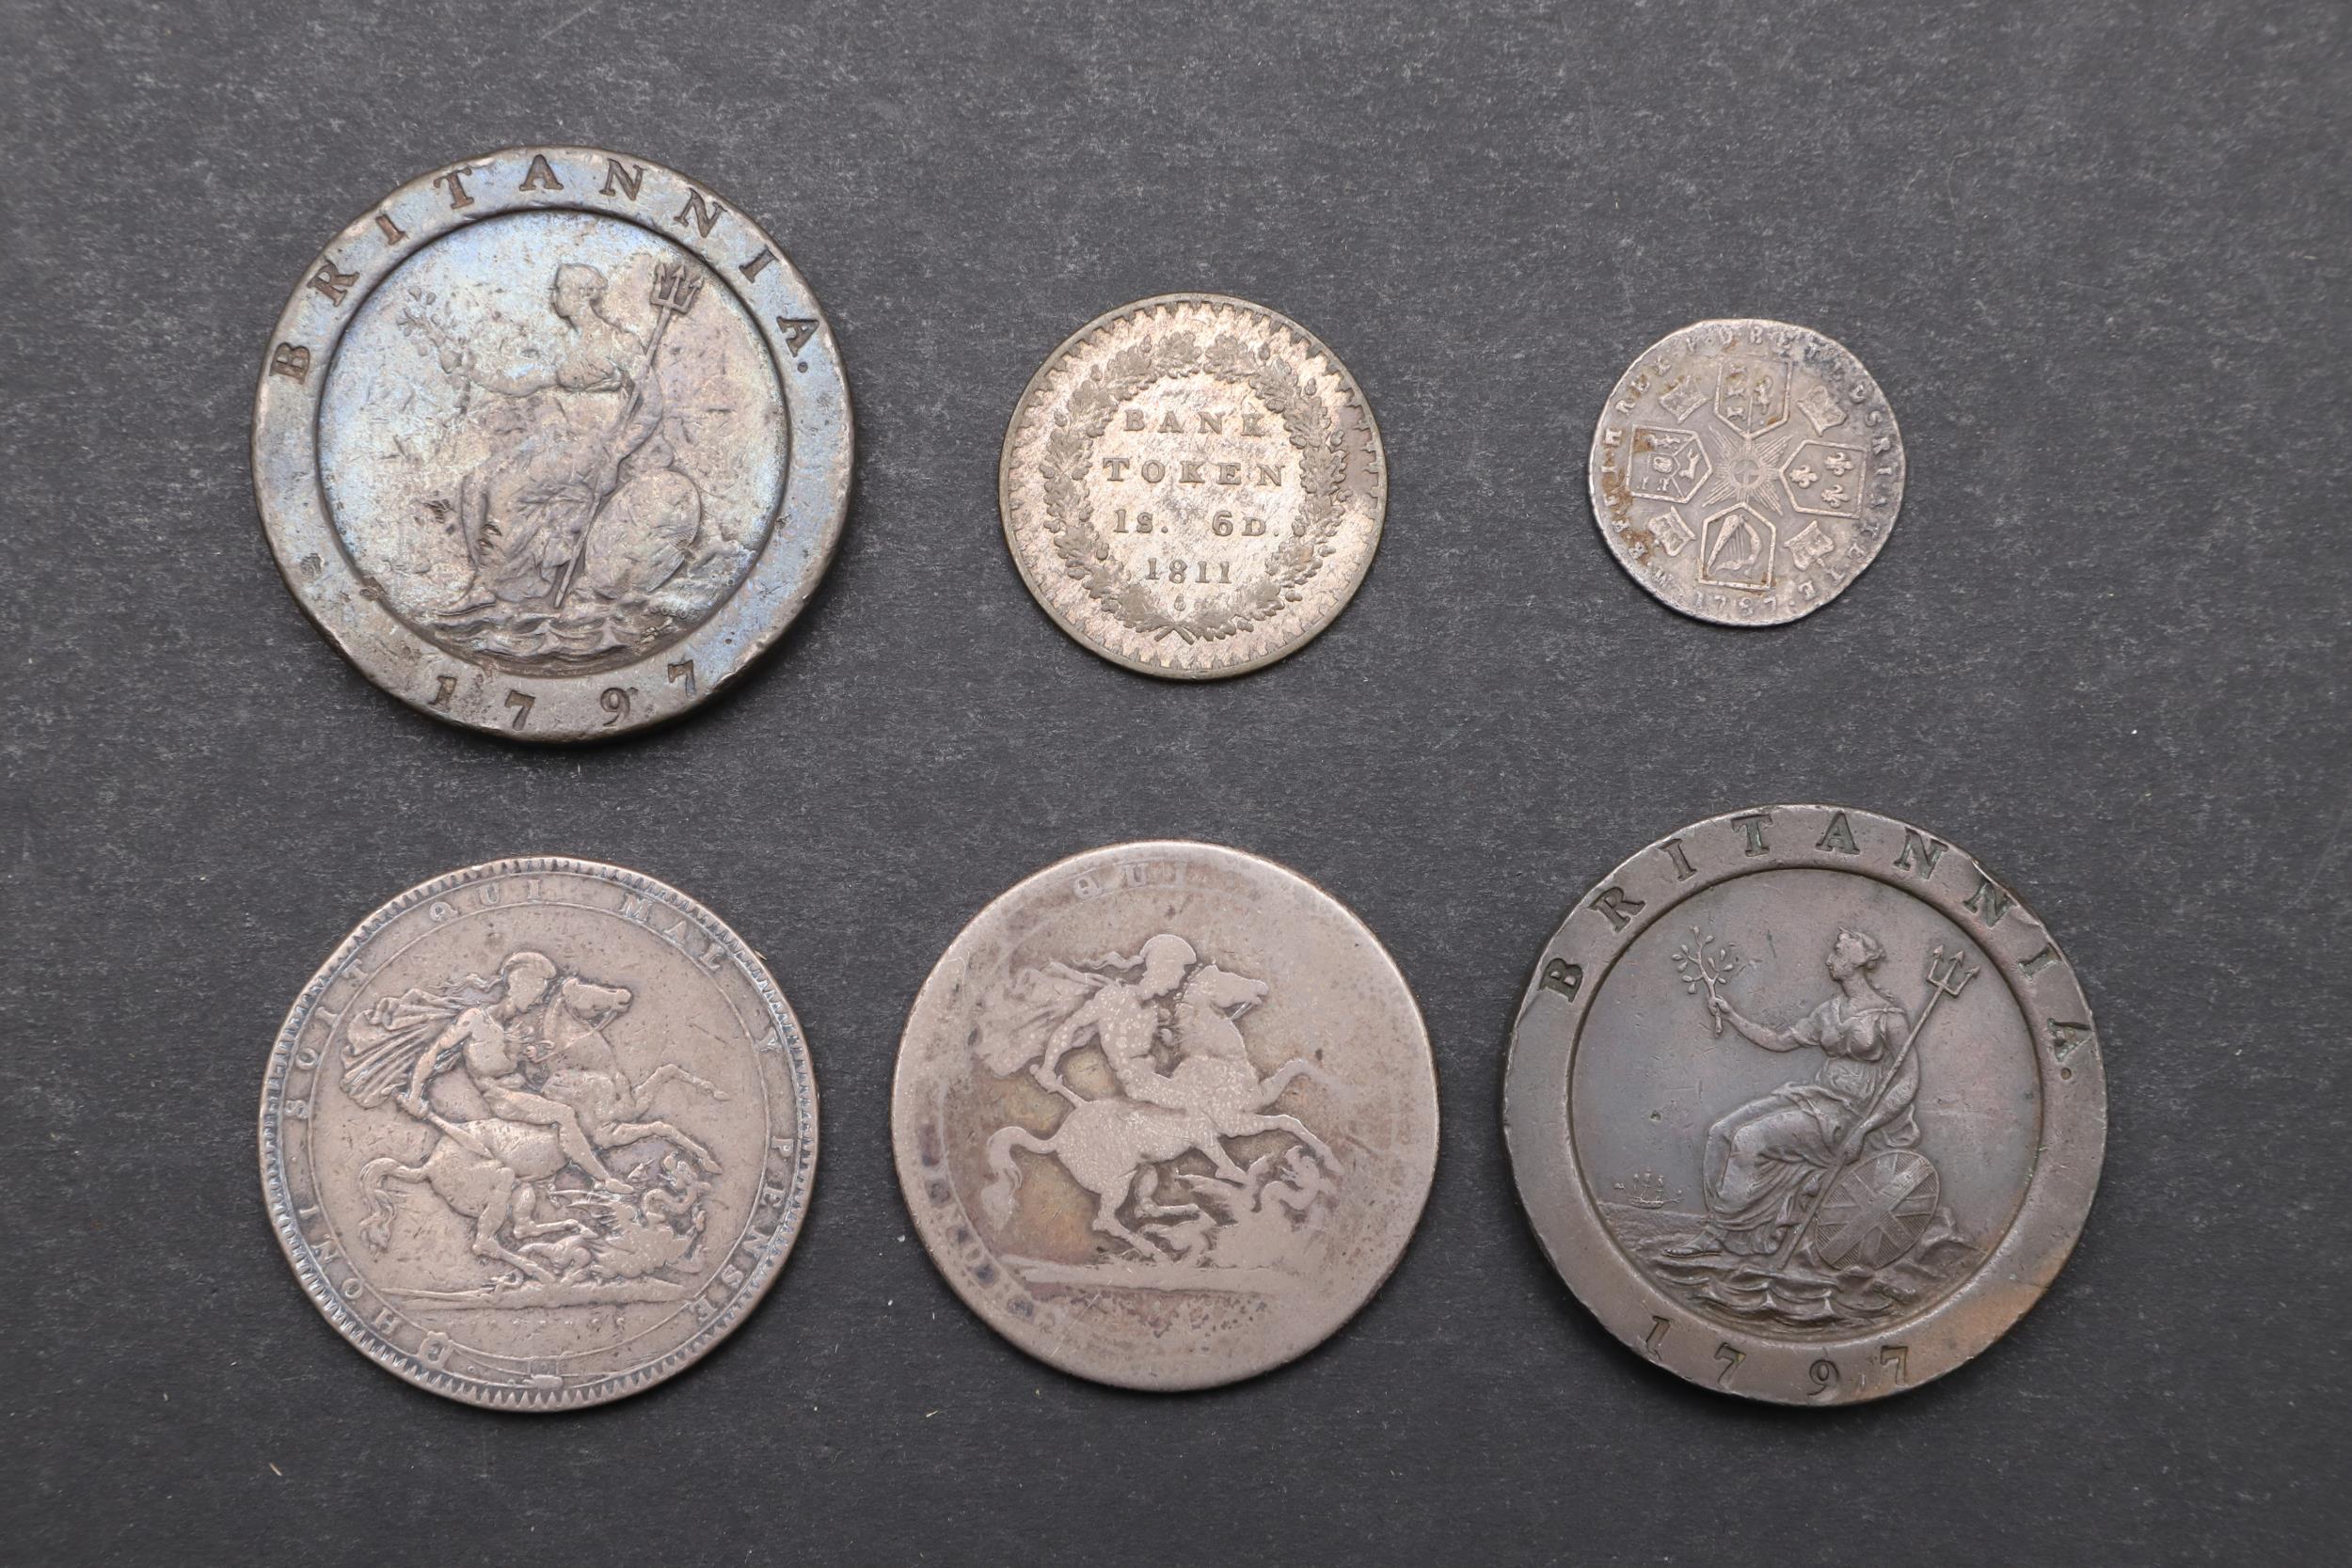 A GEORGE III CROWN AND A SMALL COLLECTION OF SIMILAR COINS. - Image 7 of 7